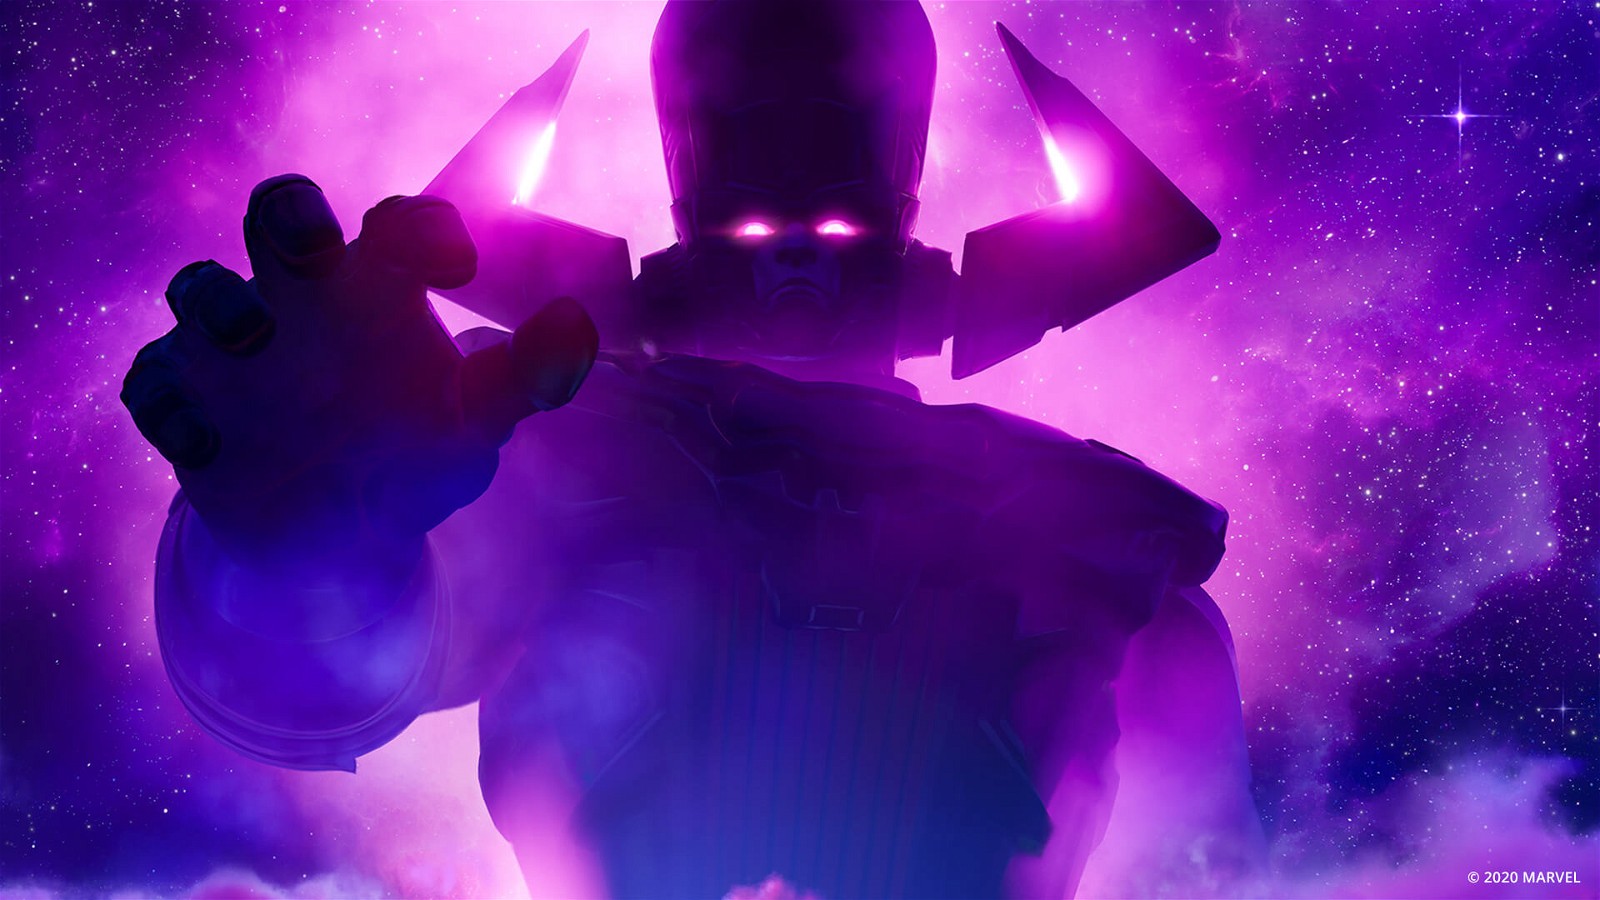 Galactus also appeared in Fortnite.